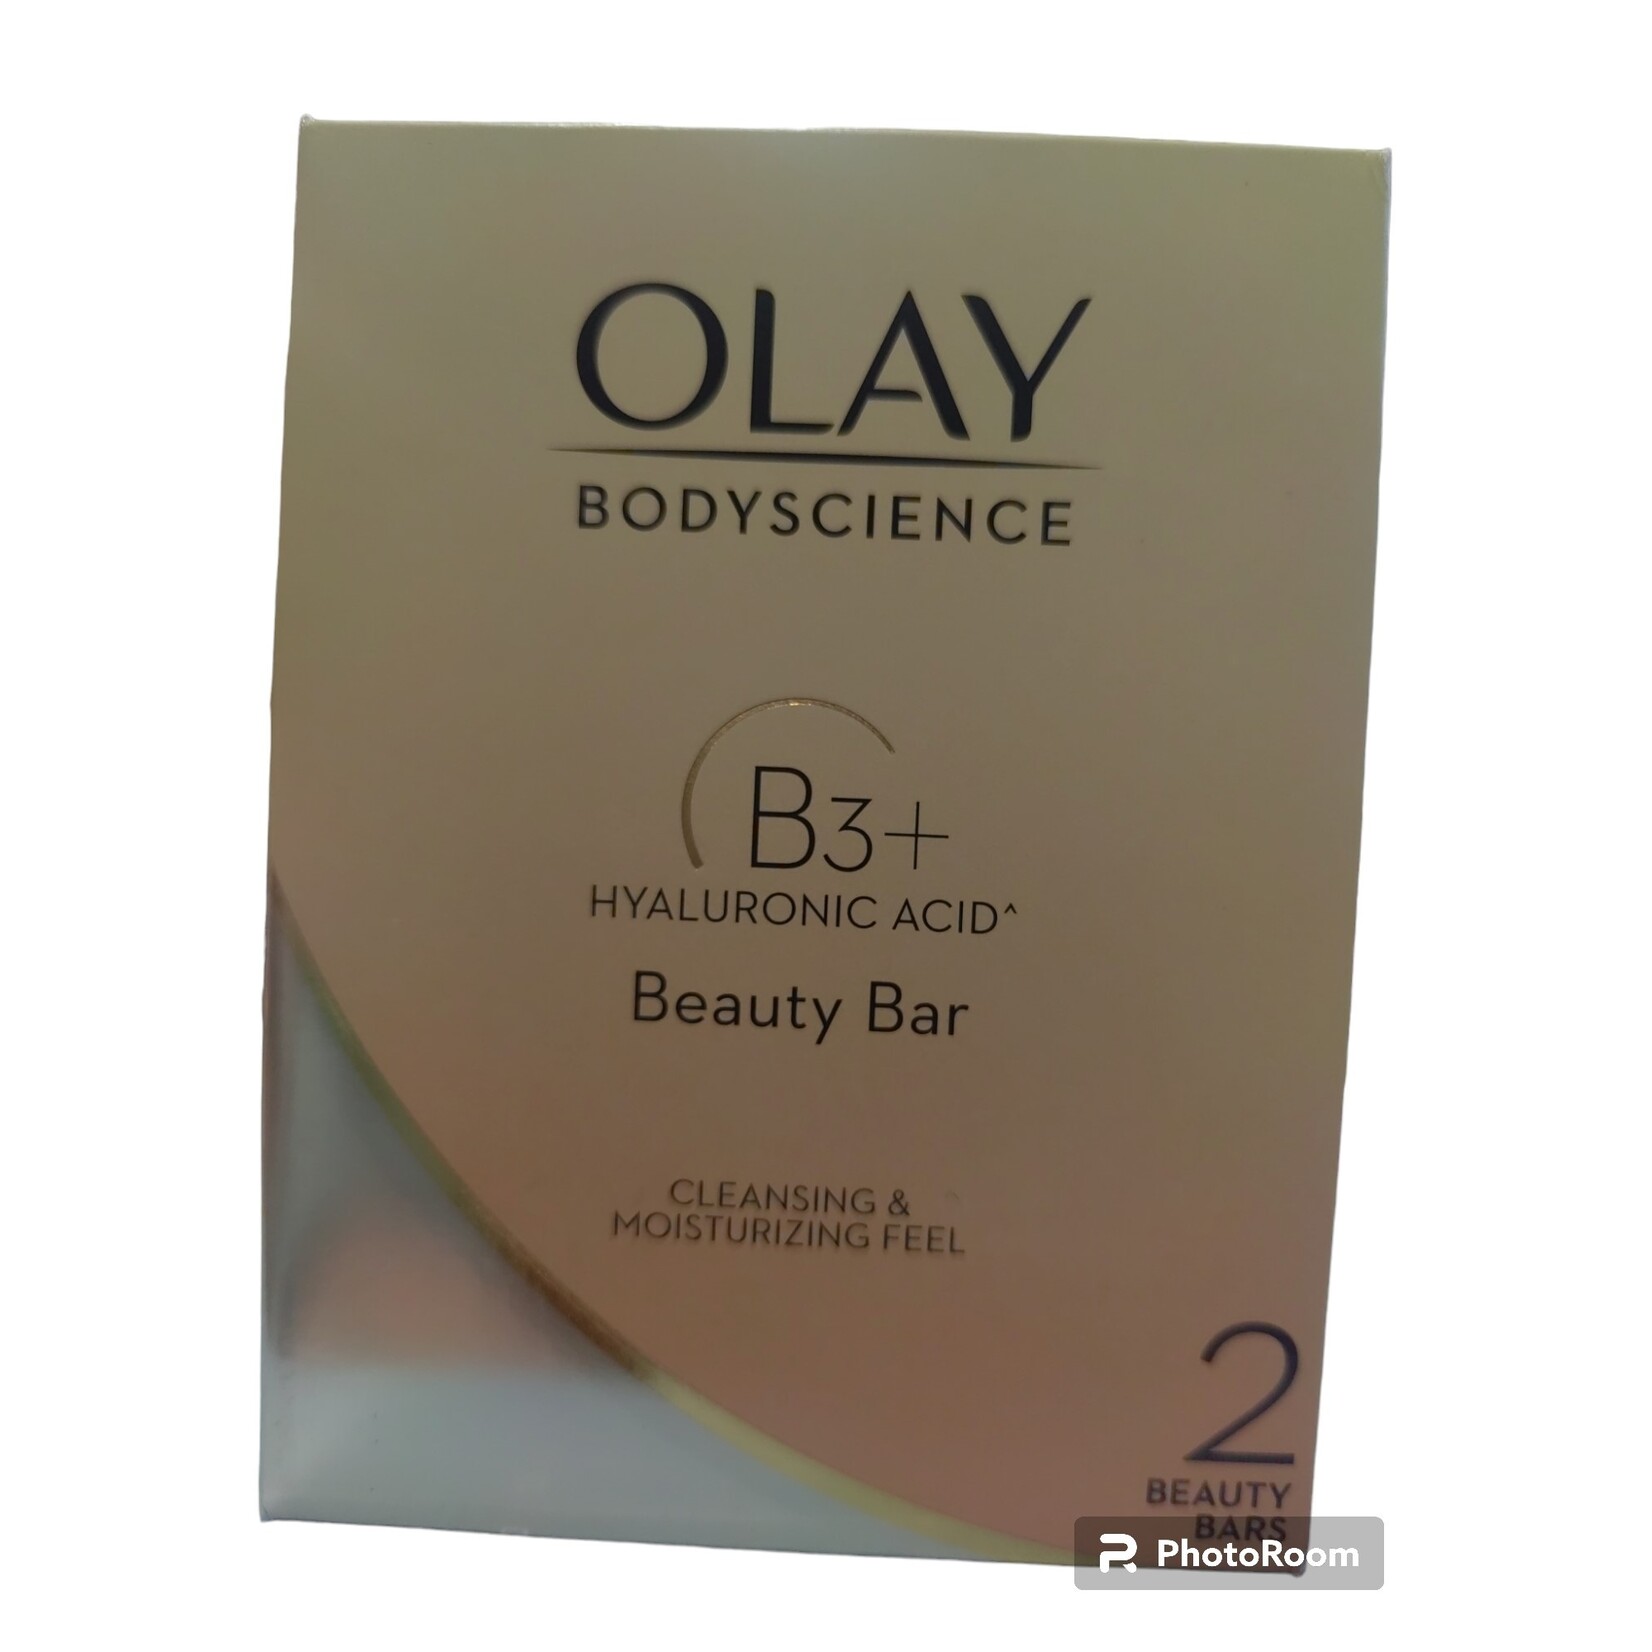 Olay, laat je stralen! Olay Bodyscience B3+ Acide Hyaluronique 2x85 grammes